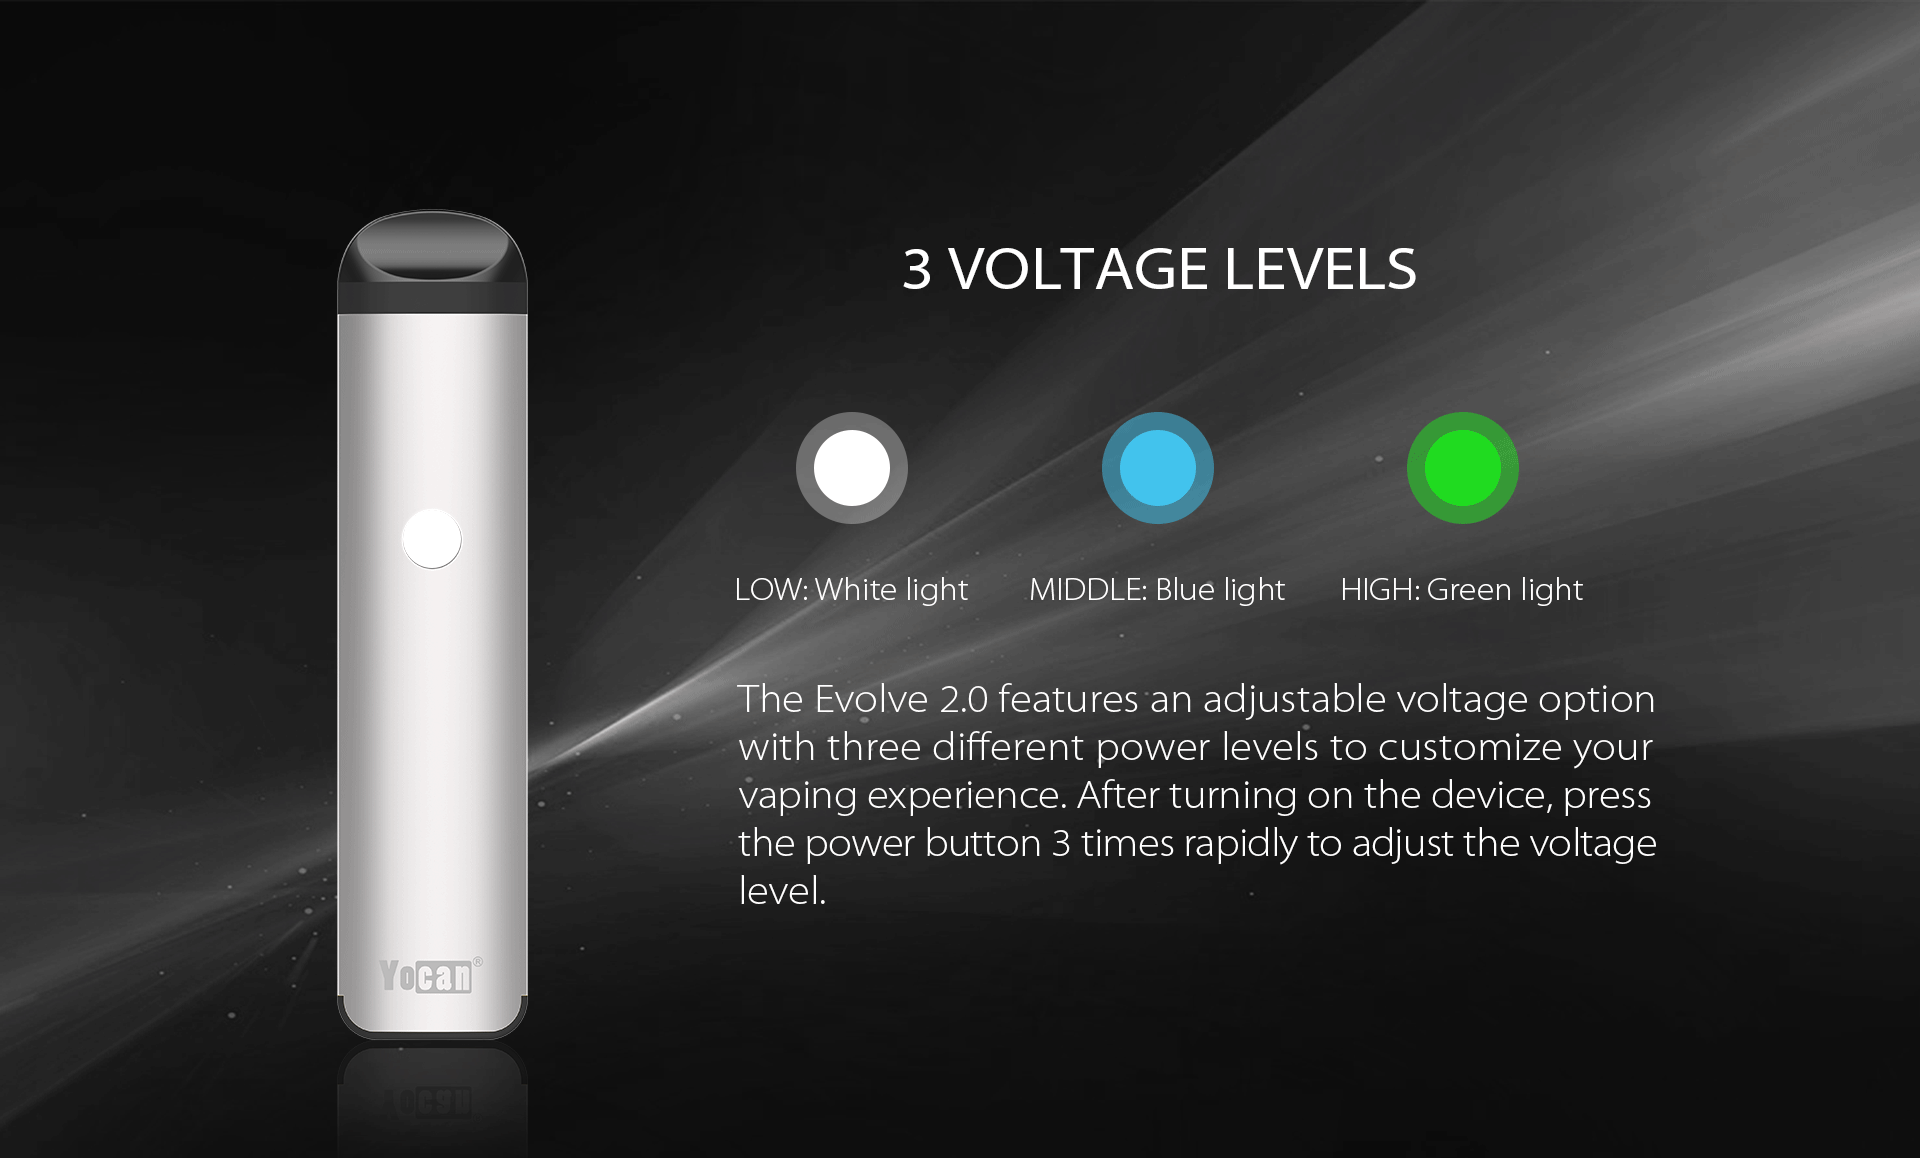 Yocan Evolve 2.0 features Three Voltage Levels